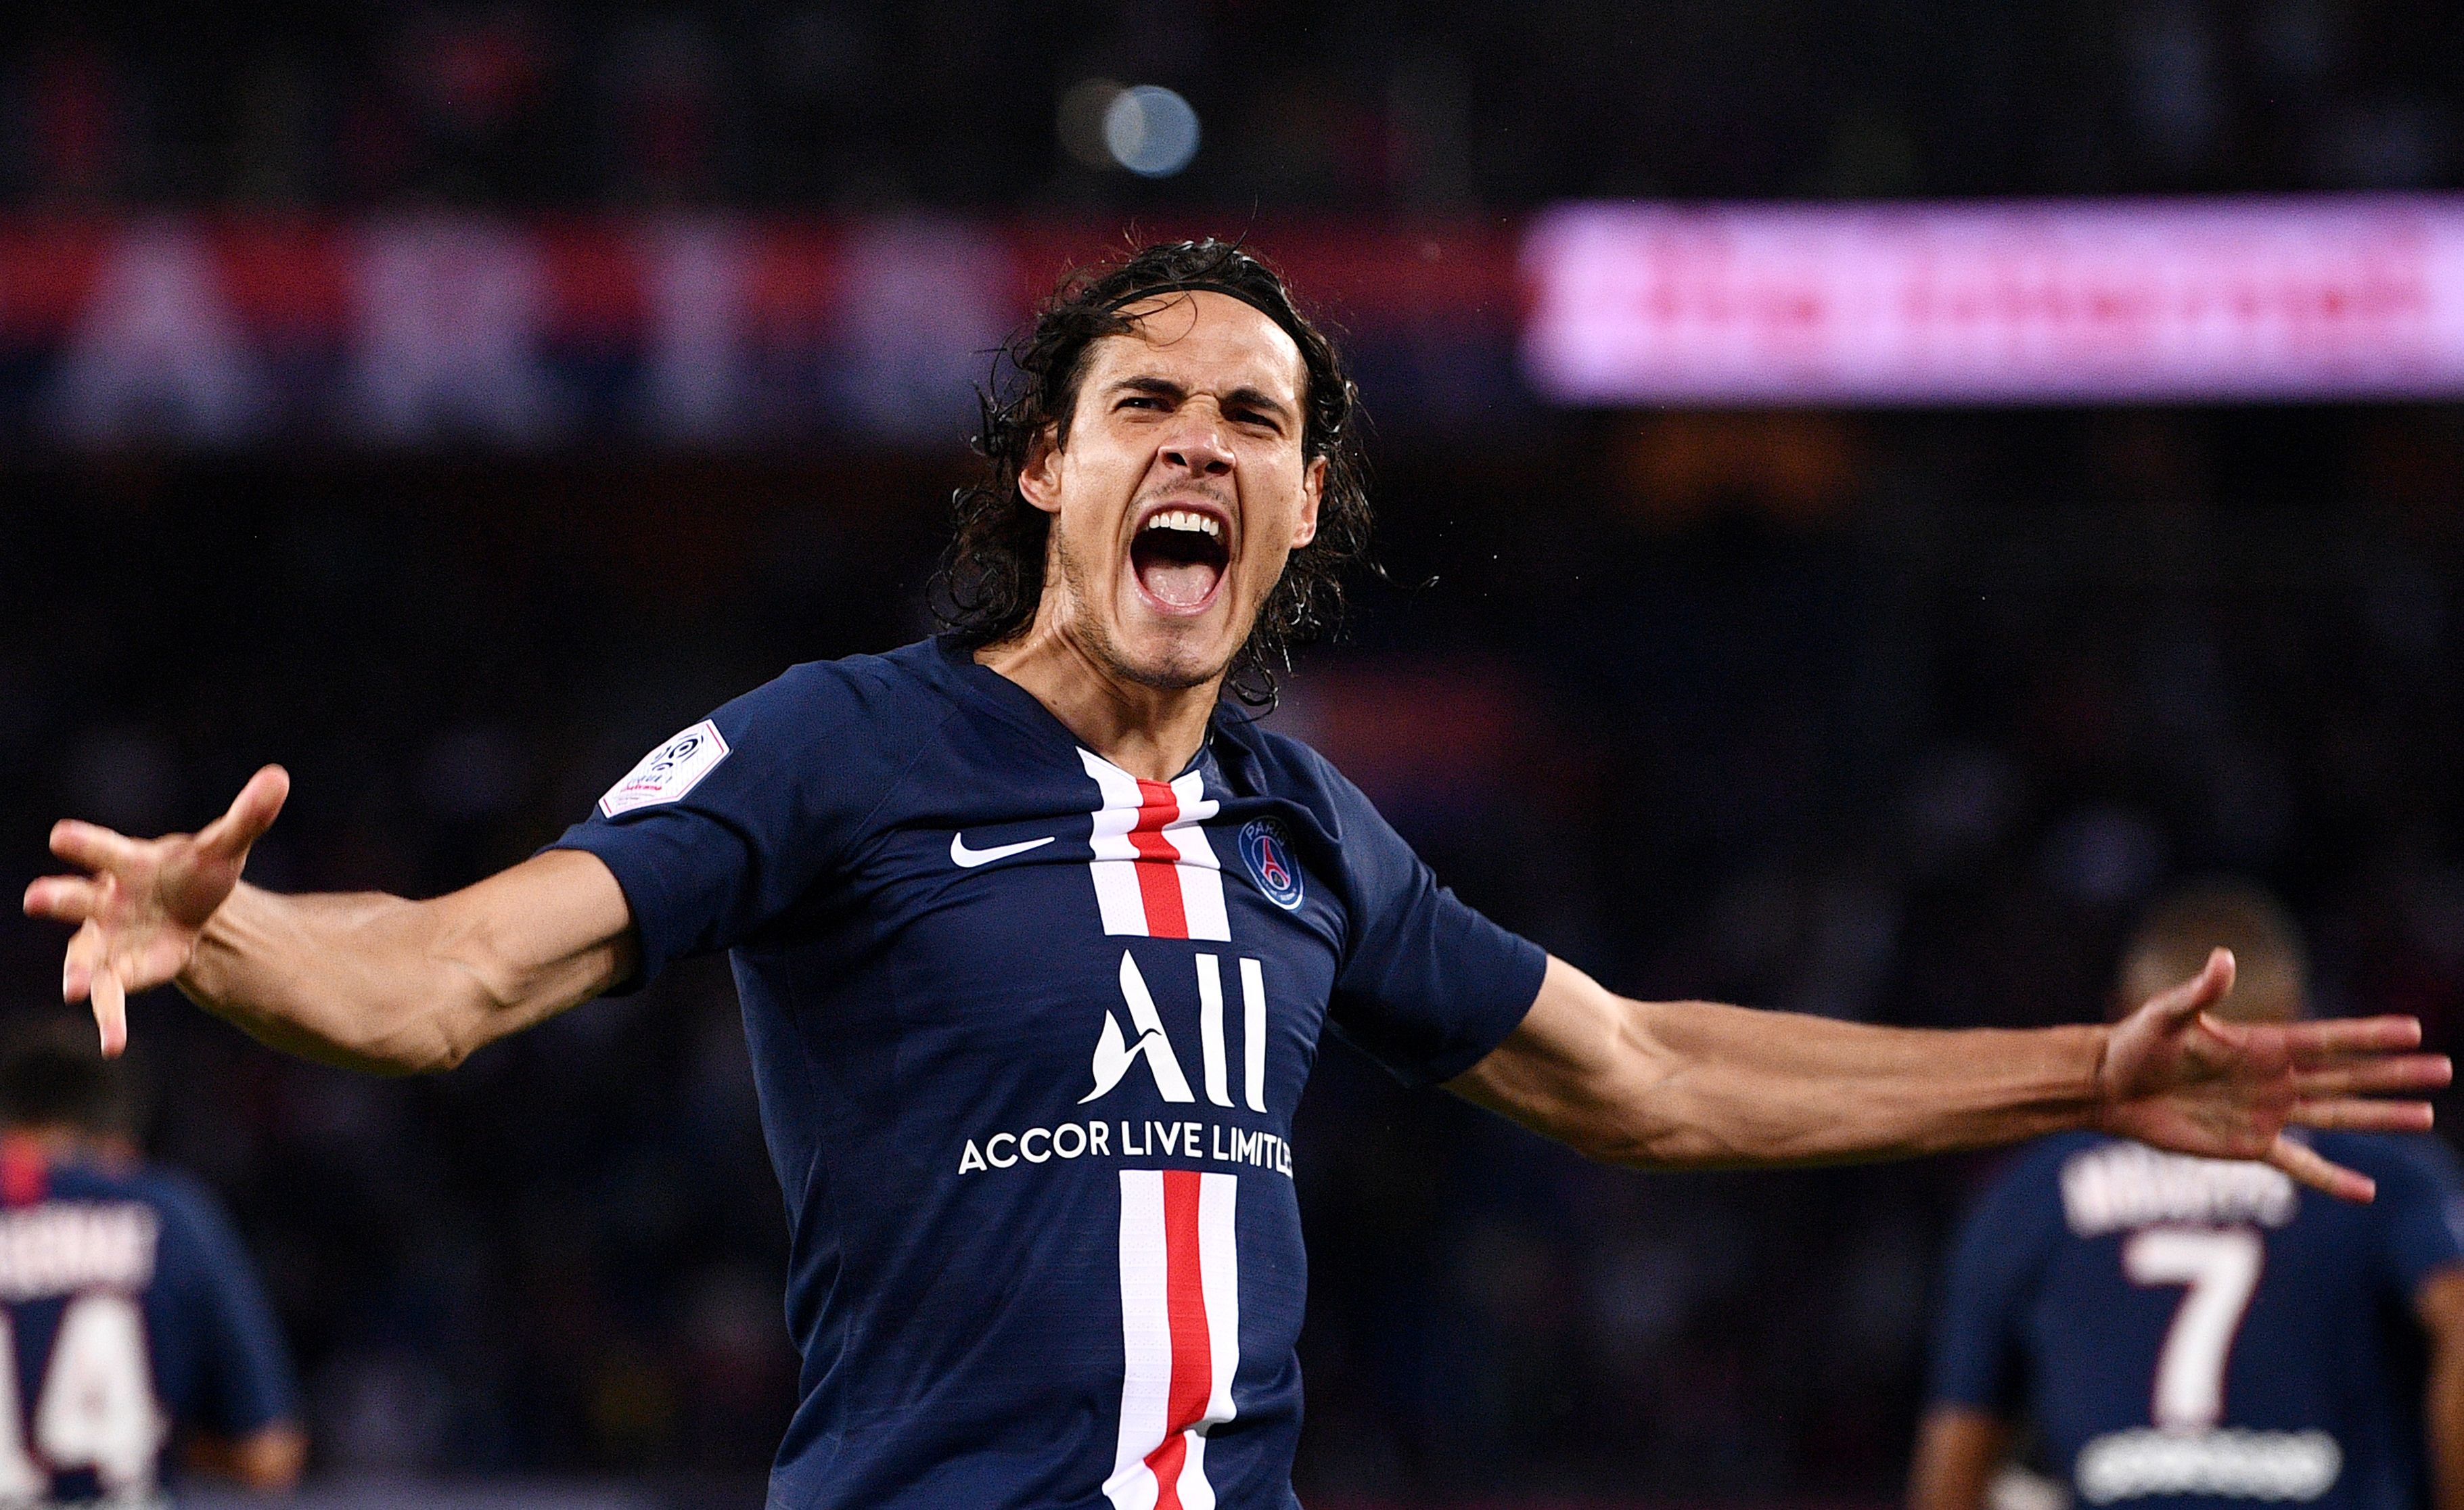 Cavani has rejected a contract offer from Manchester United (Photo credit should read FRANCK FIFE/AFP via Getty Images)